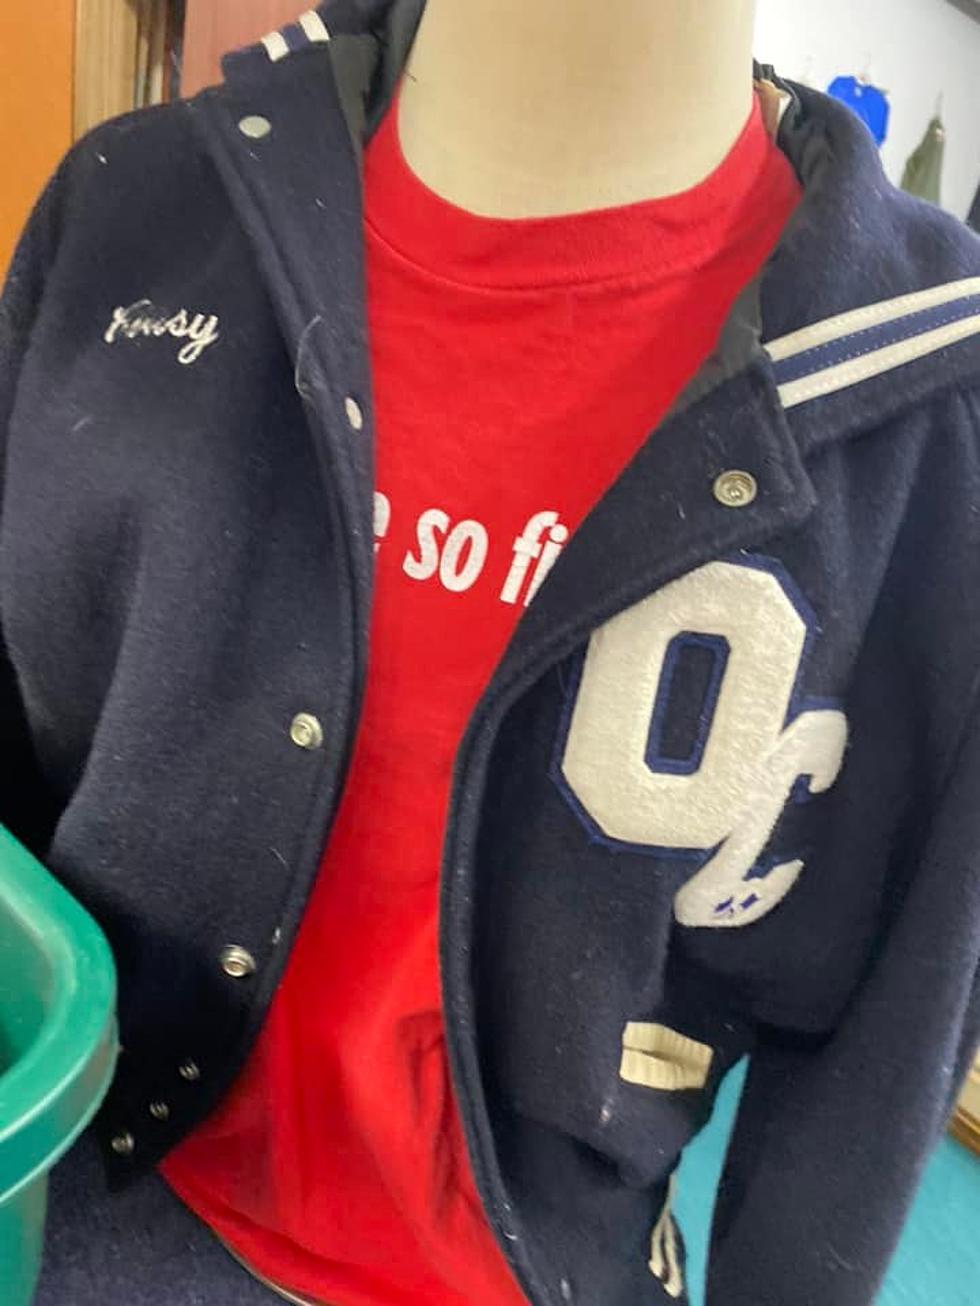 Ohio County KY High School Band Jacket is Spotted in Louisville